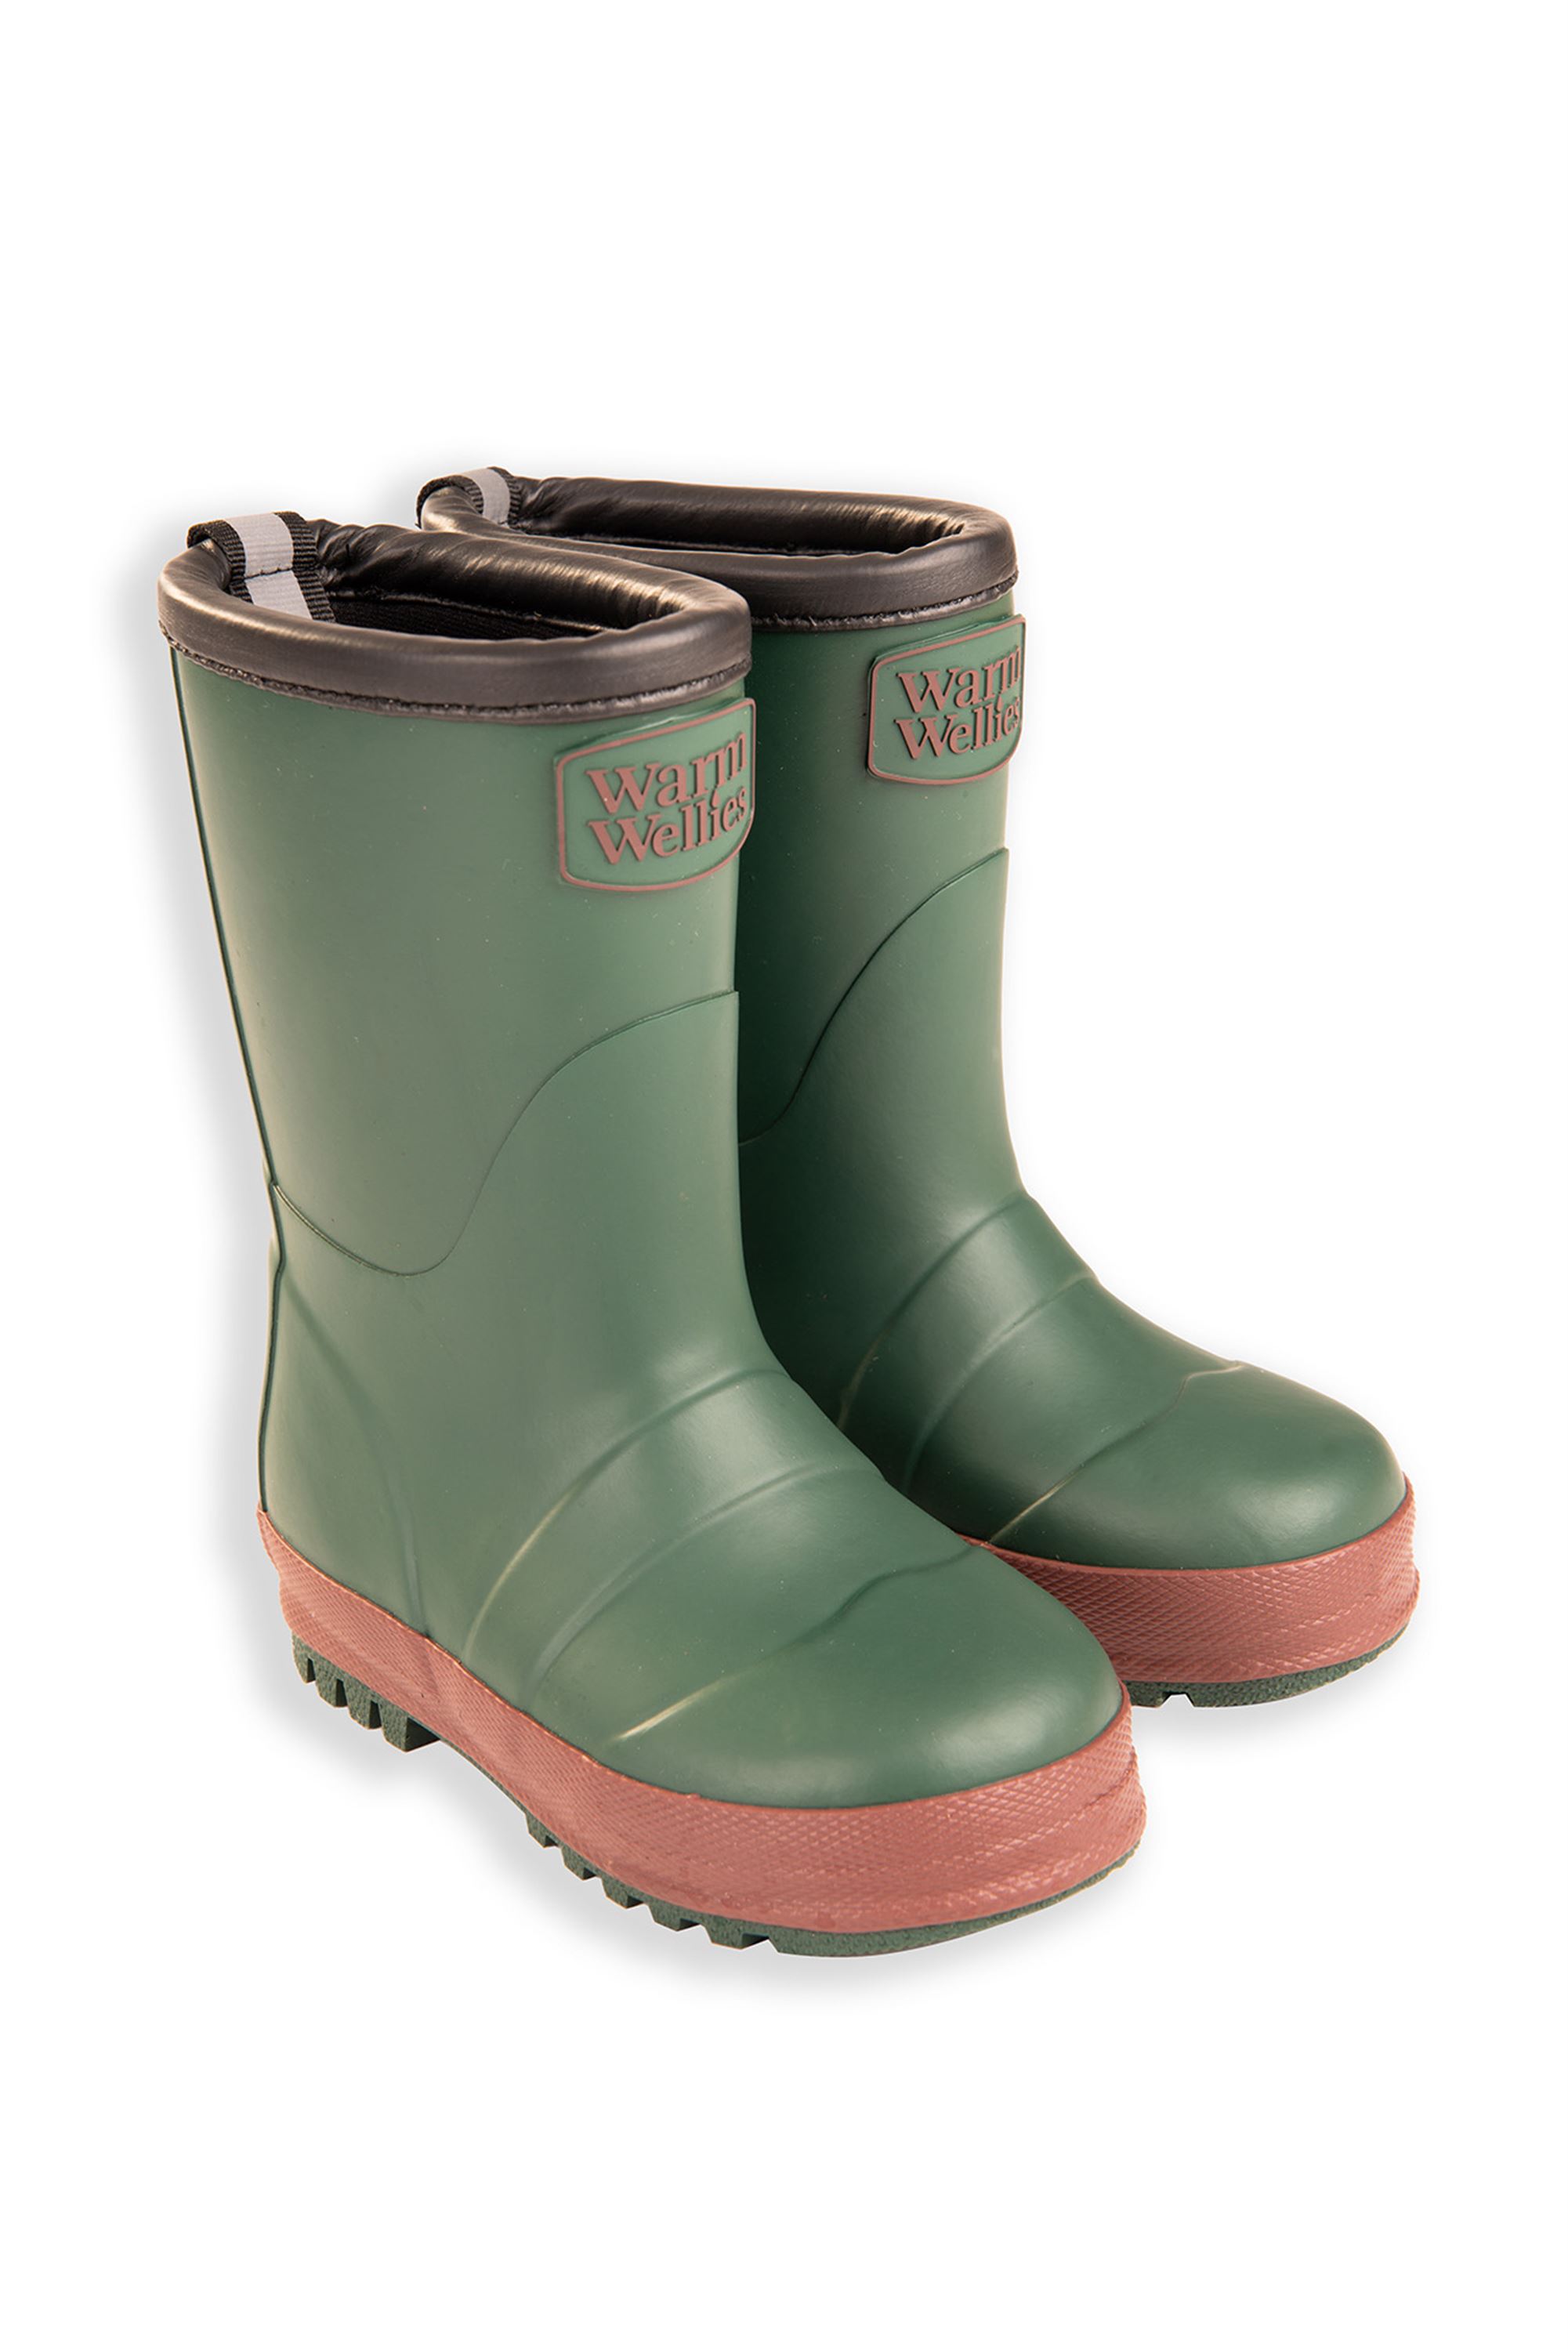 Green Toddler Warm Wellies (Flat Sole) | The Warm Welly Company